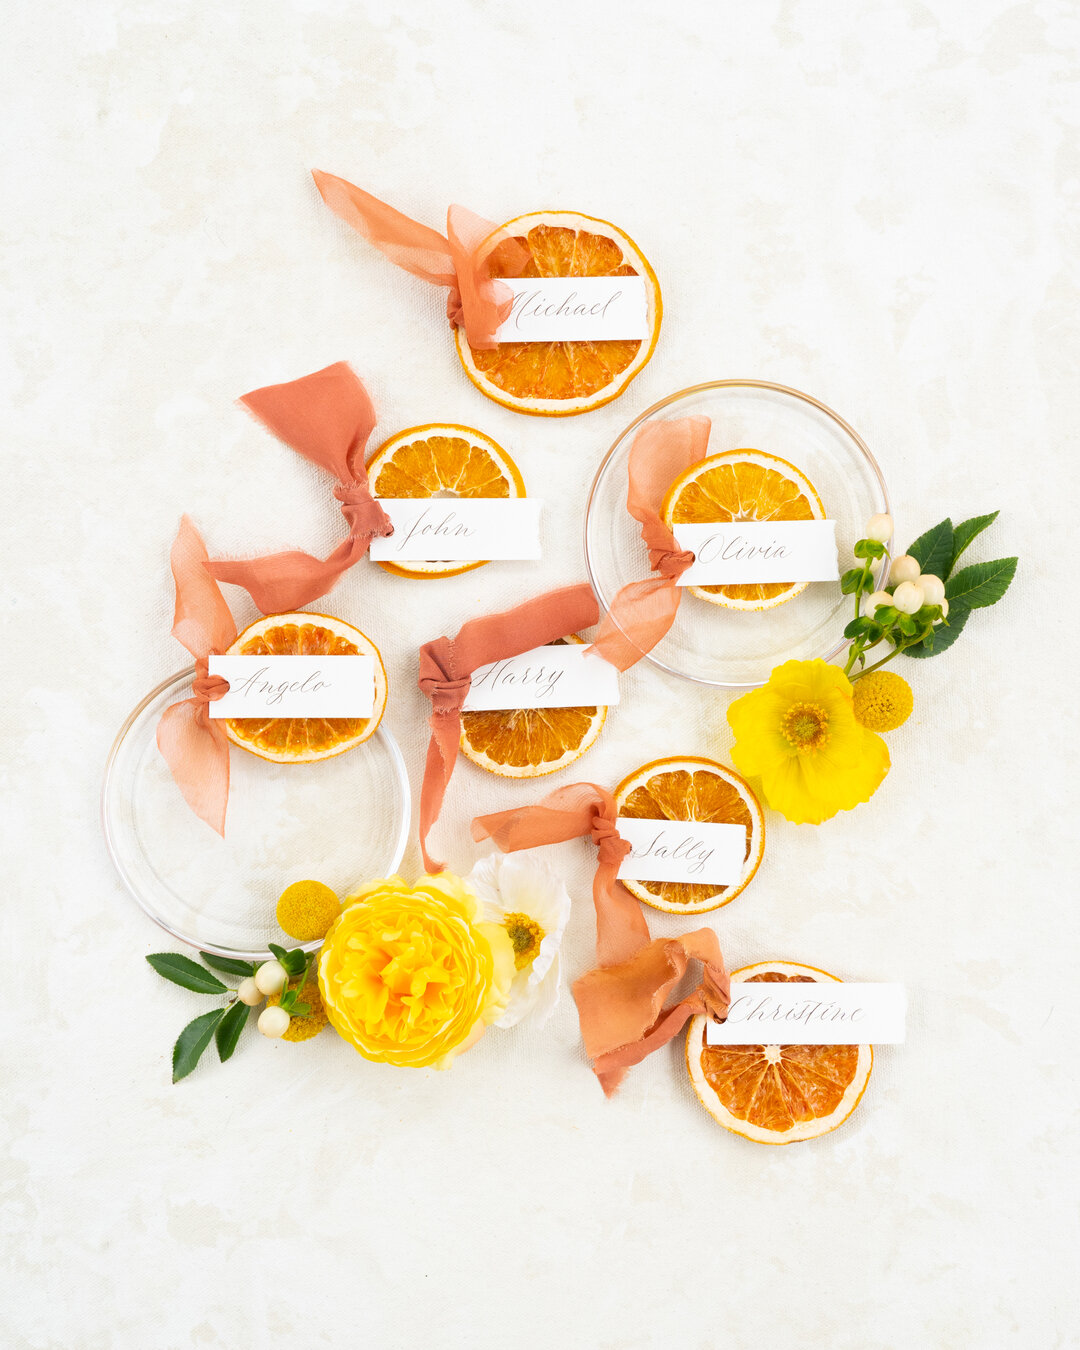 These citrus place cards are such a summer vibe ✌️🍊 ​​​​​​​​
​​​​​​​​
How&rsquo;s everyone summer going so far? Any fun vacations coming up? ​​​​​​​​
Some important reminders for my out of studio days (and slower replies to new inquiries) 👇​​​​​​​​